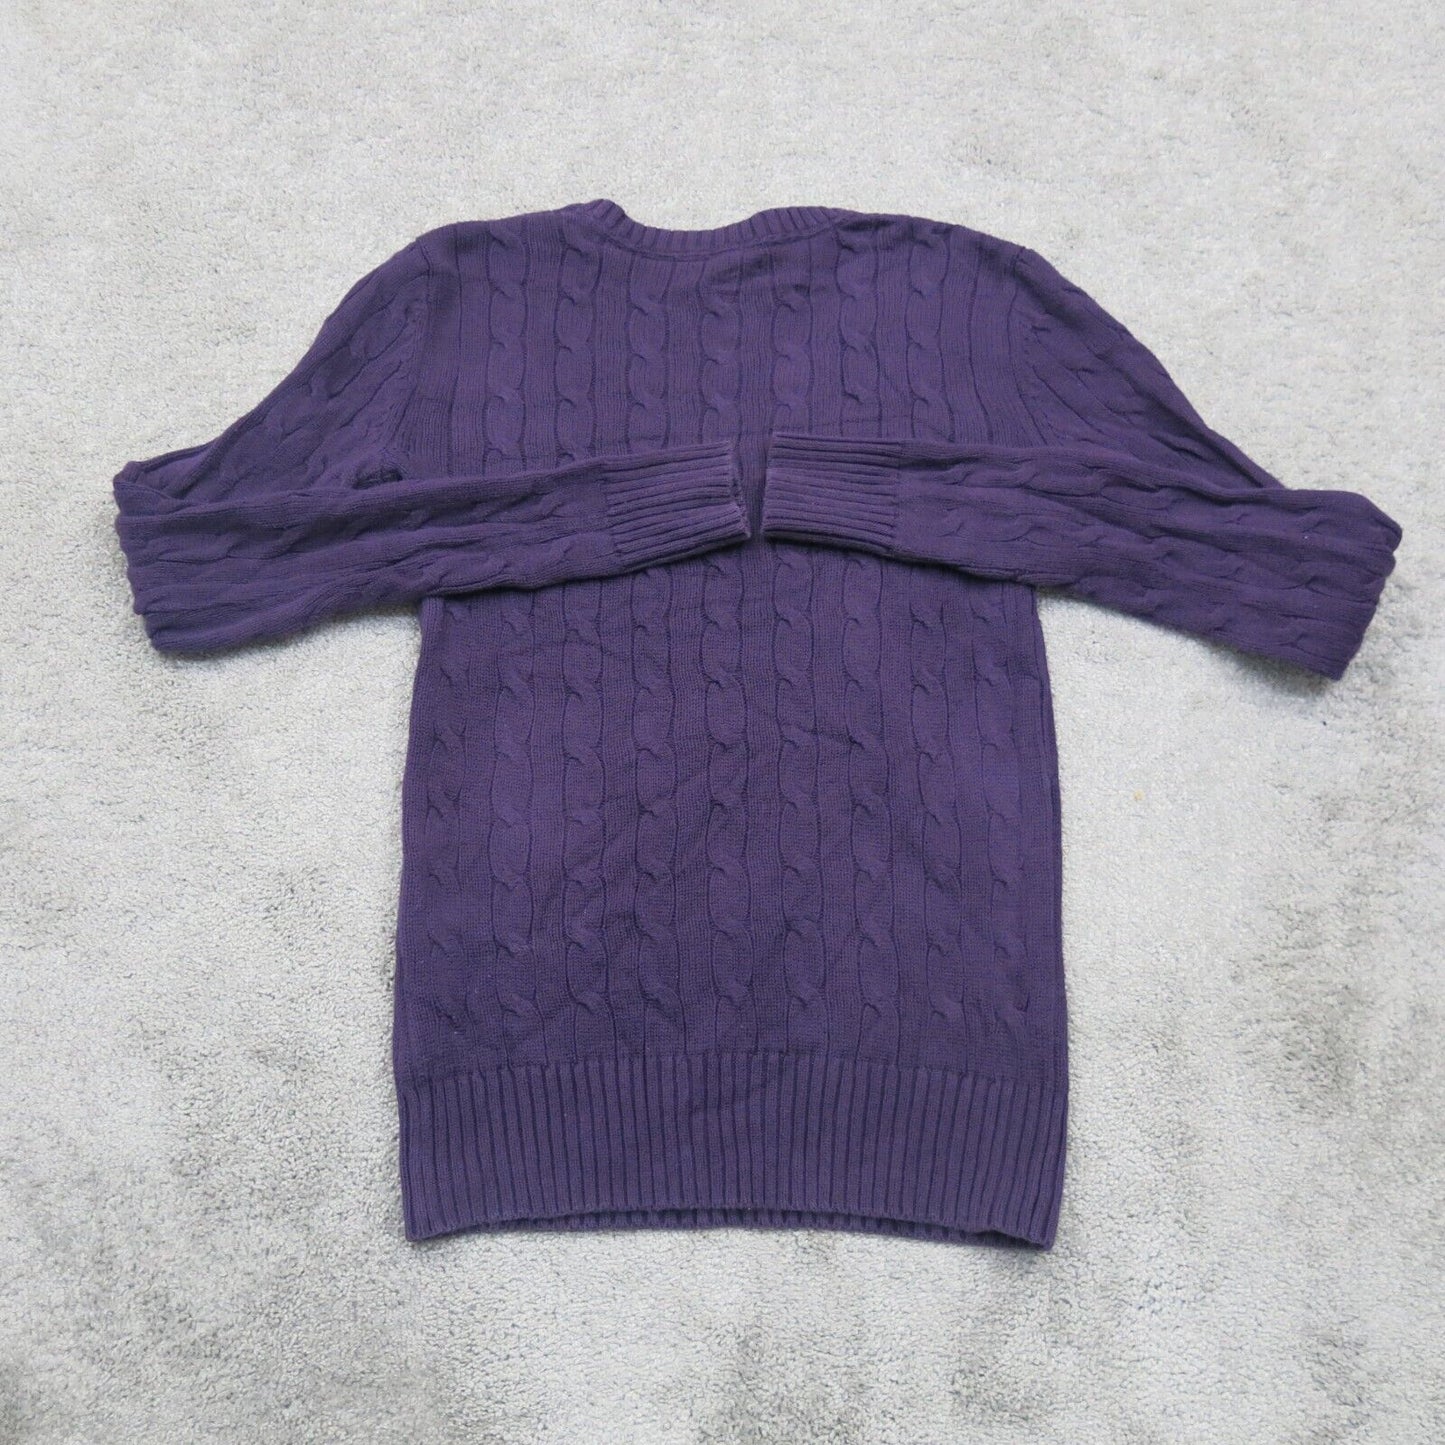 Tommy Hilfiger Womens Sweater Knitted Long Sleeve V Neck 100%Cotton Purple SZ XS